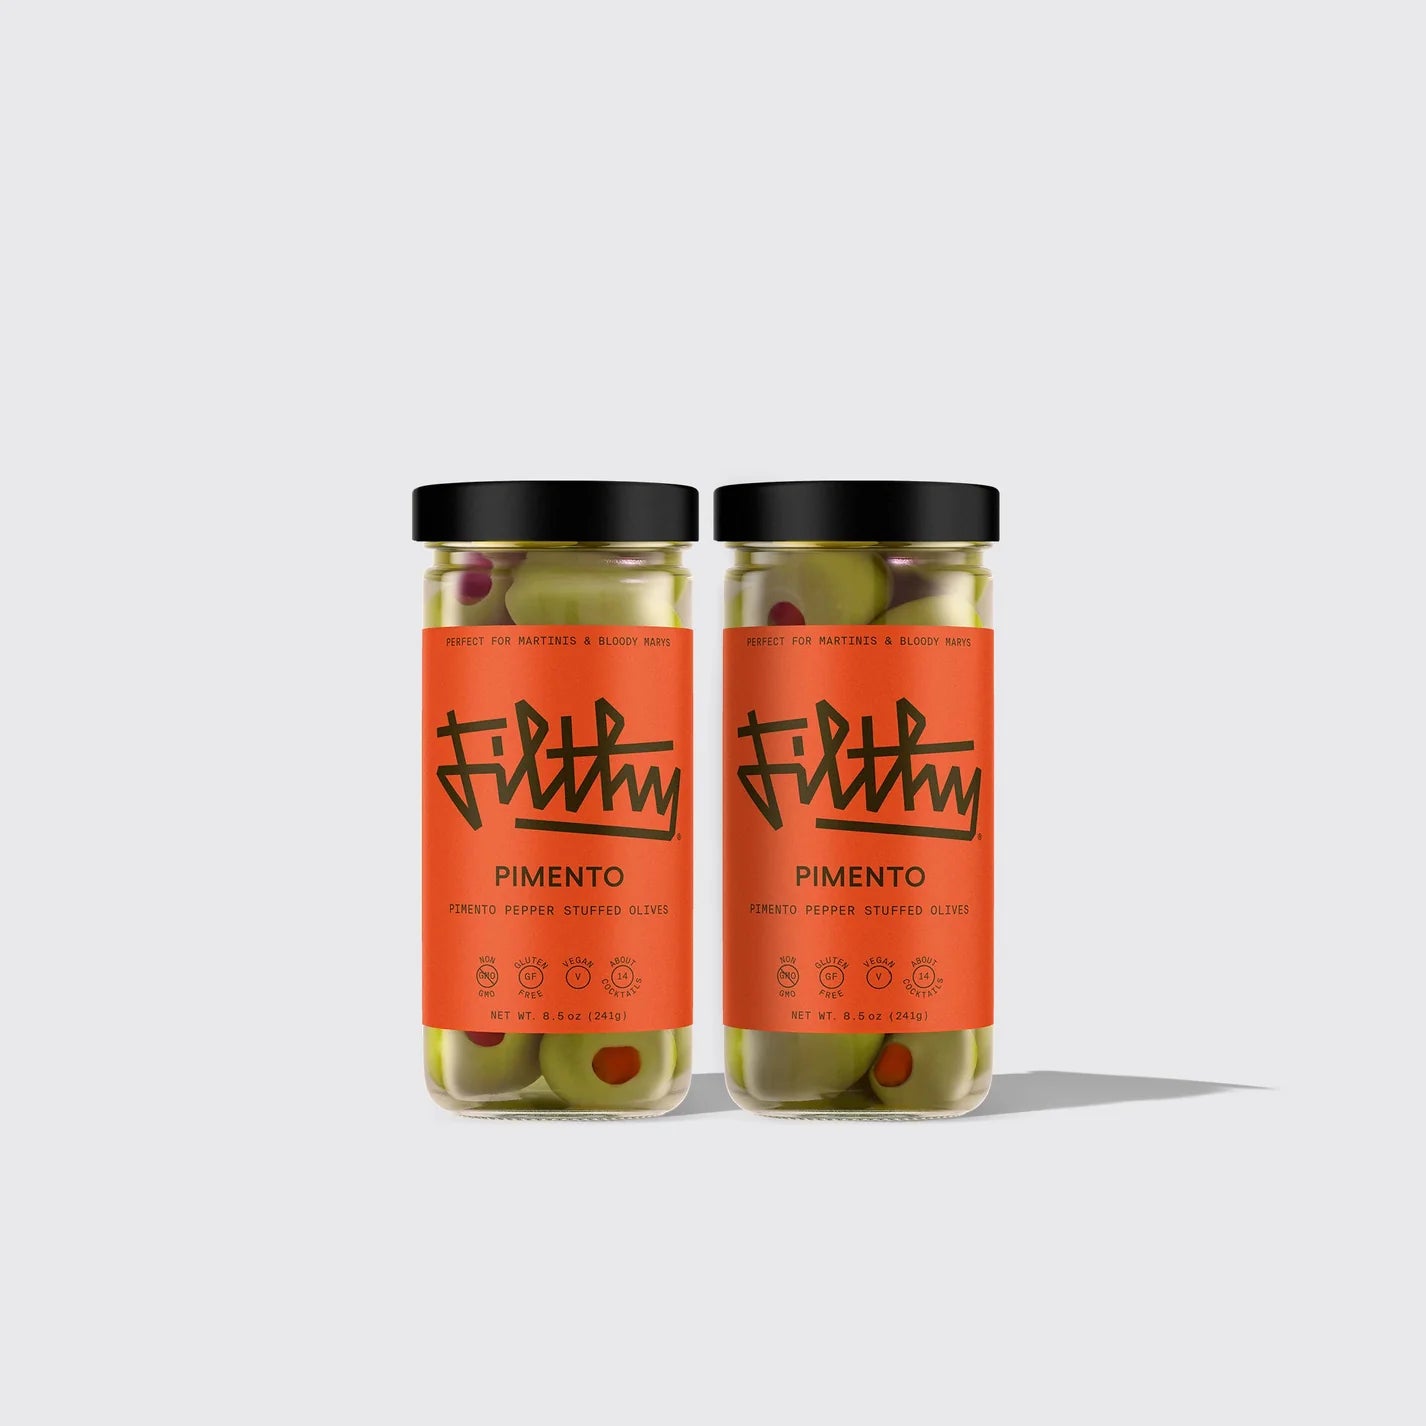 Two jars of Pimento Pepper Stuffed Olives on white background